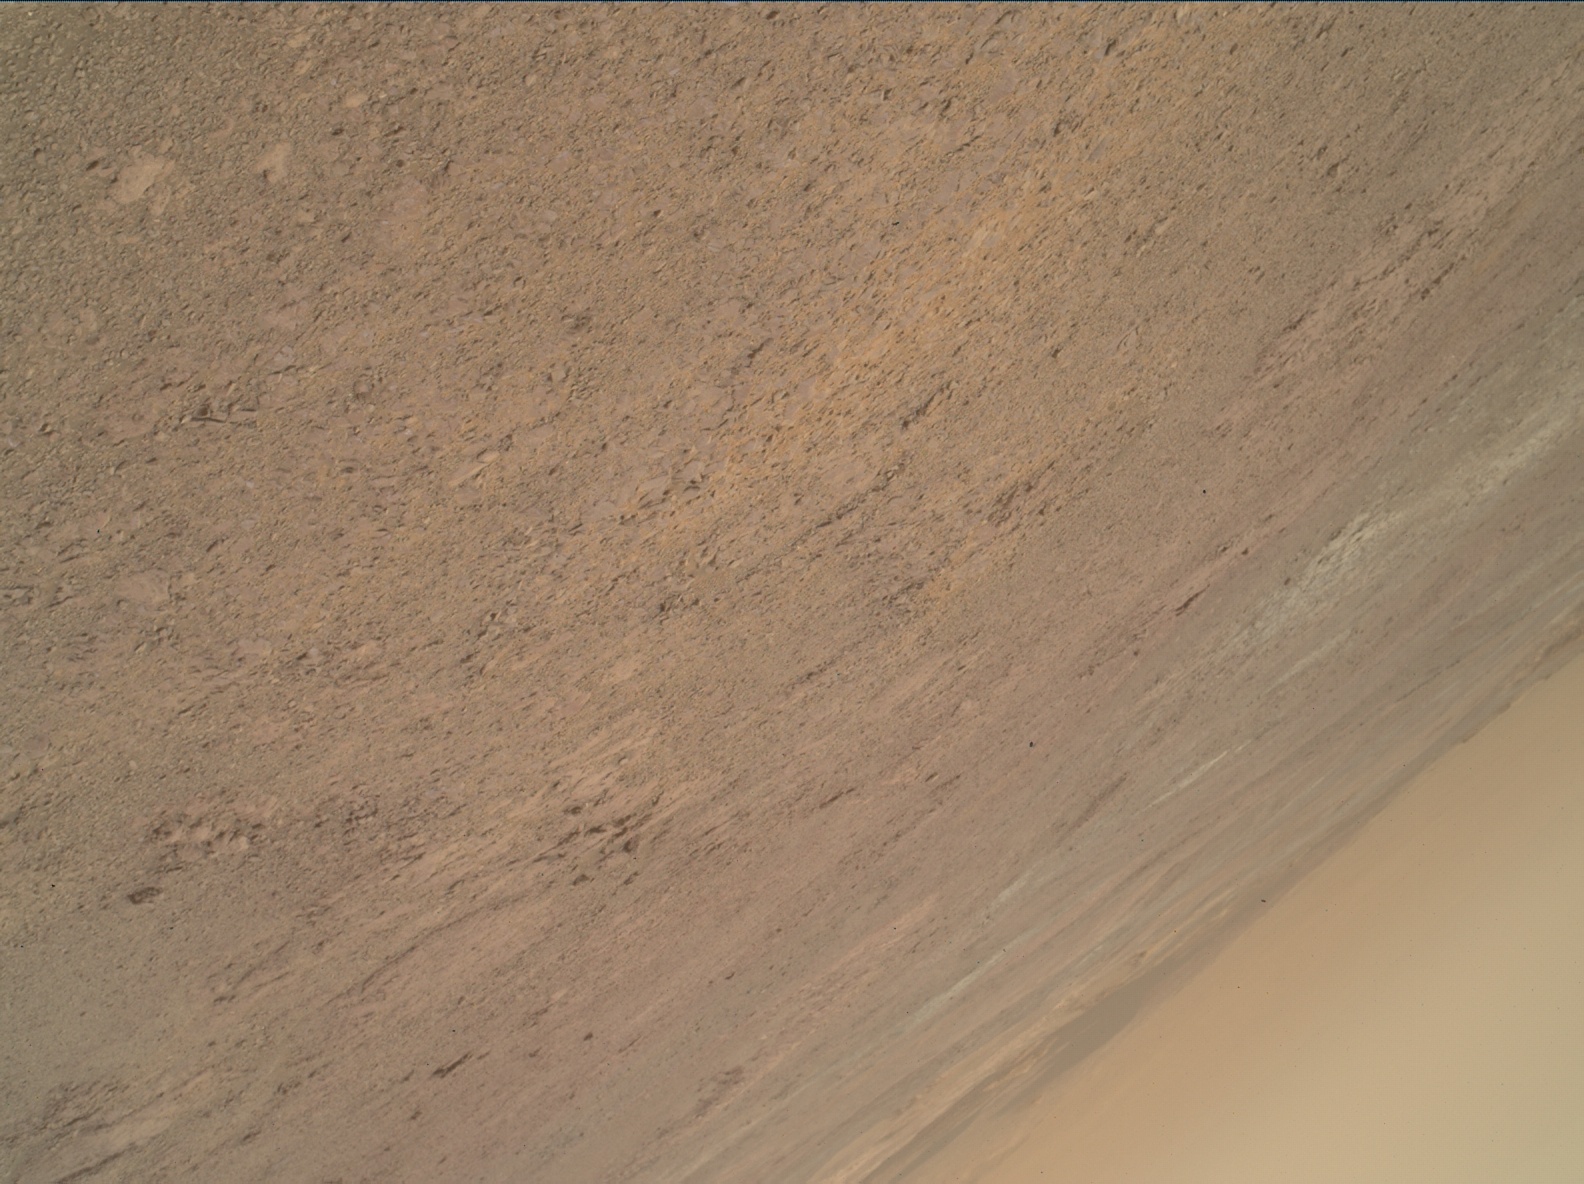 Nasa's Mars rover Curiosity acquired this image using its Mars Hand Lens Imager (MAHLI) on Sol 2291